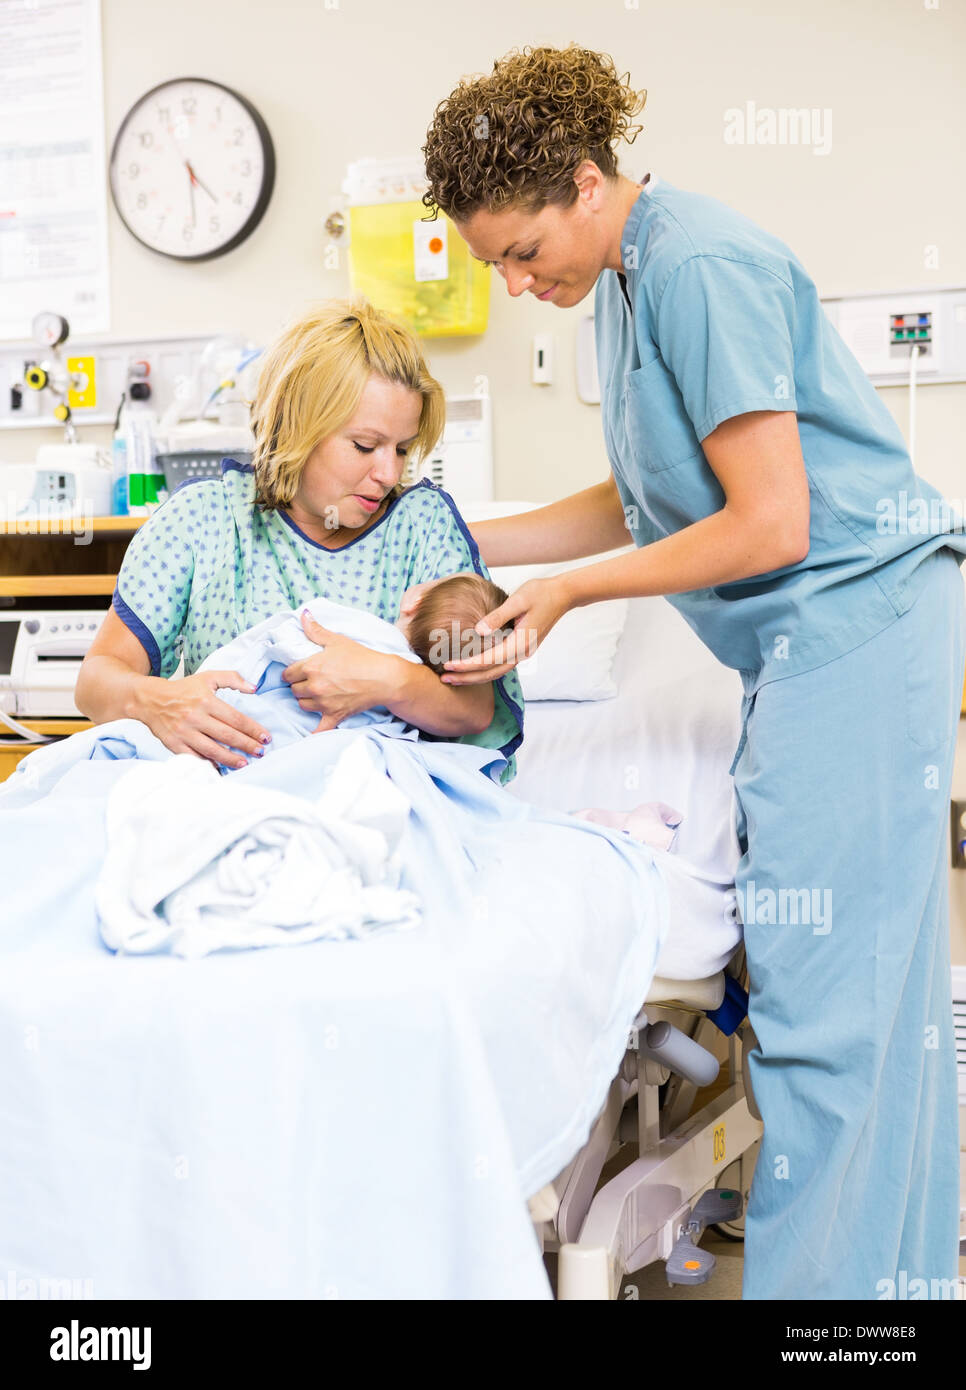 Nurse Helping Woman In Holding Newborn Baby At Hospital Stock Photo